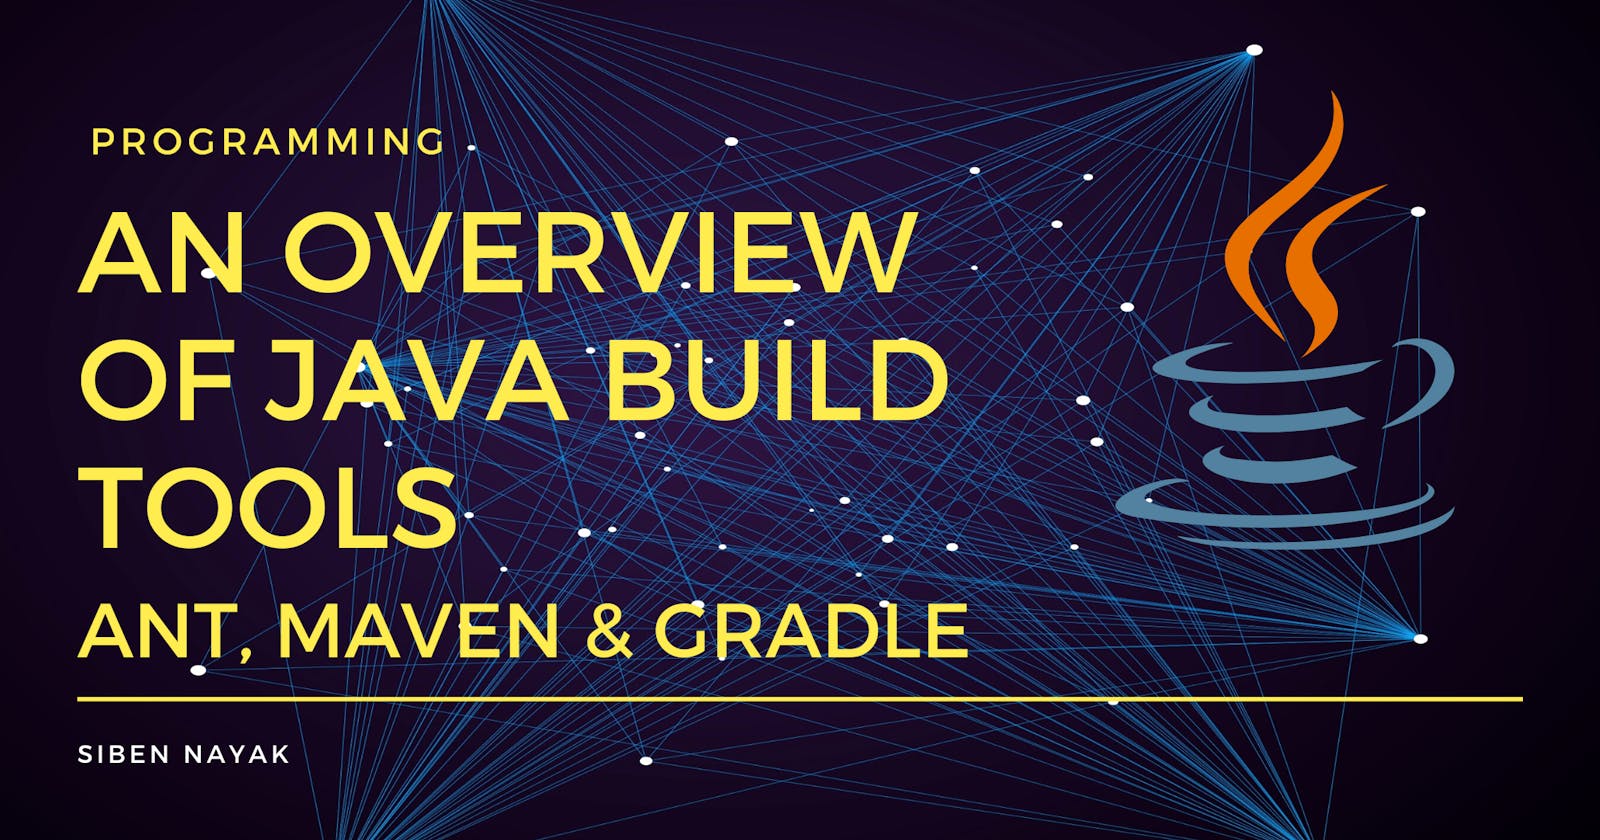 An Overview of Java Build Tools